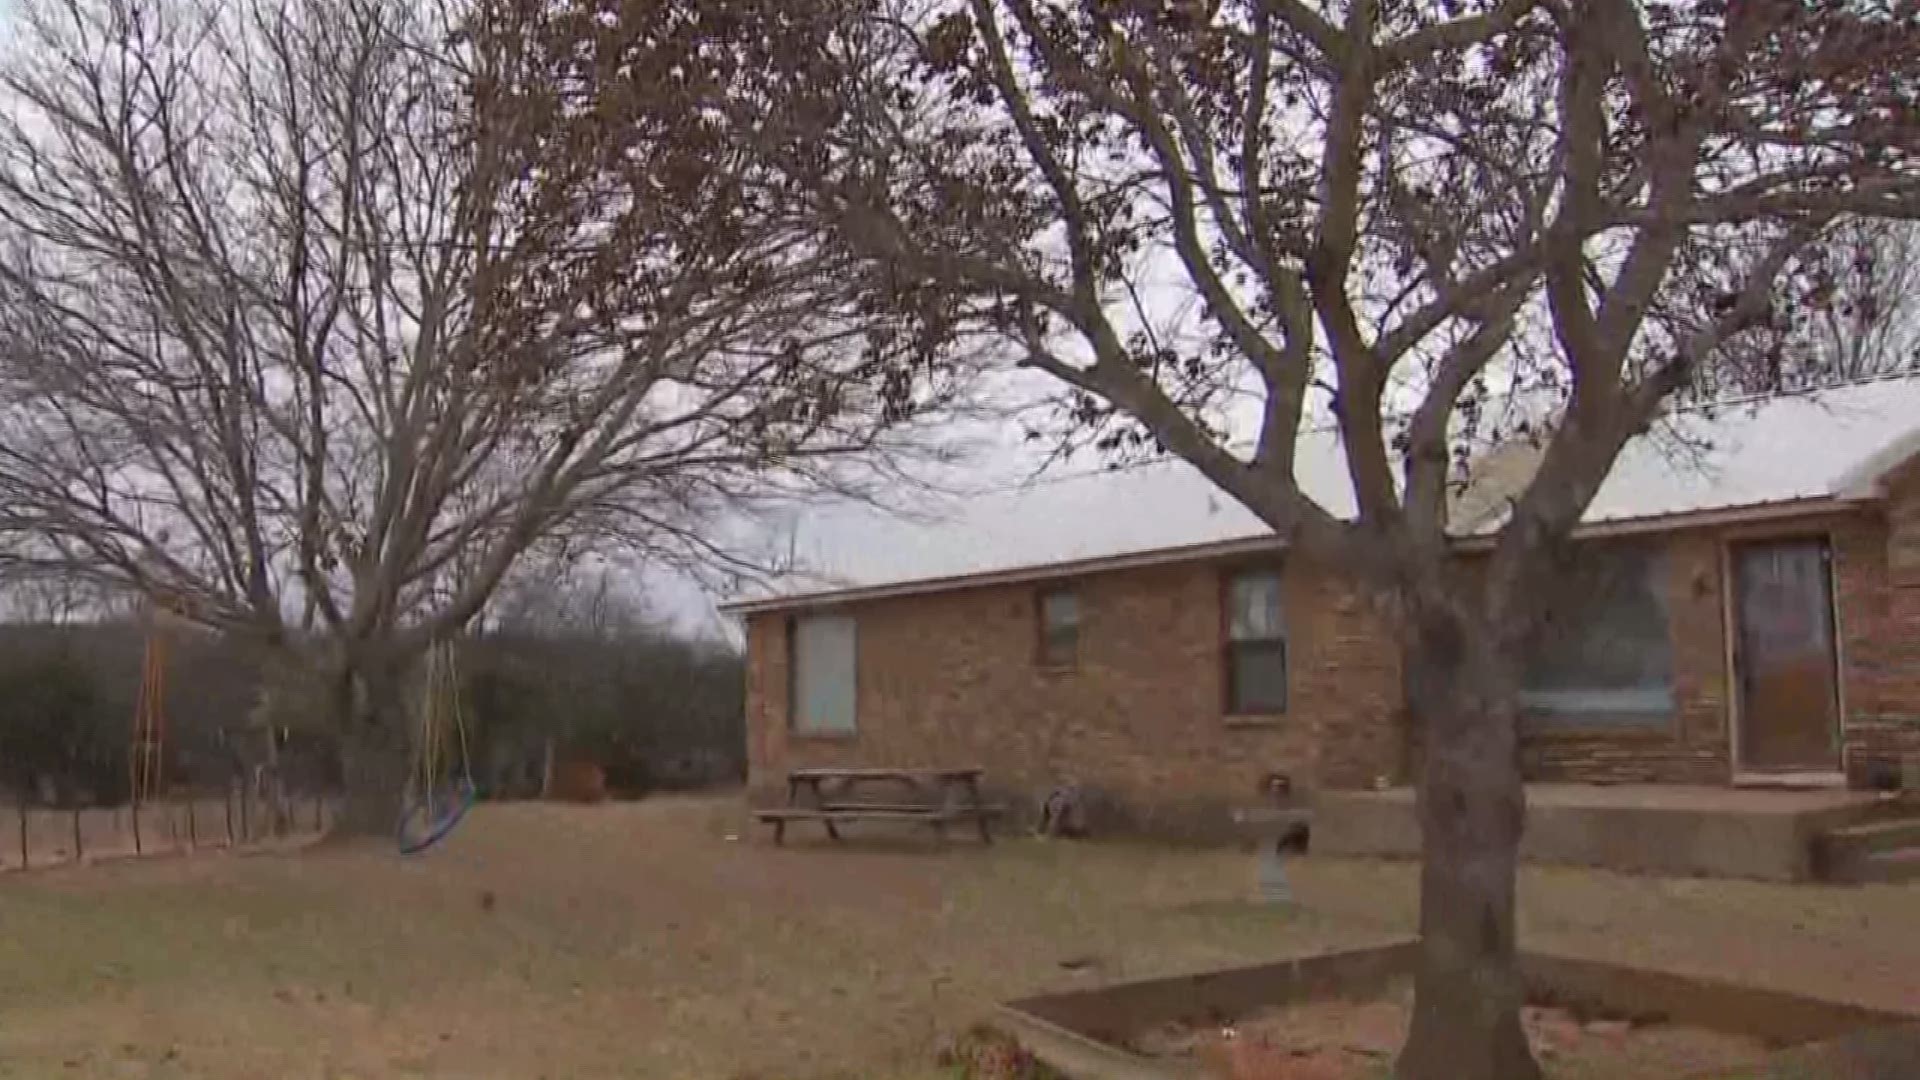 Children held captive: Family once lived in North Texas